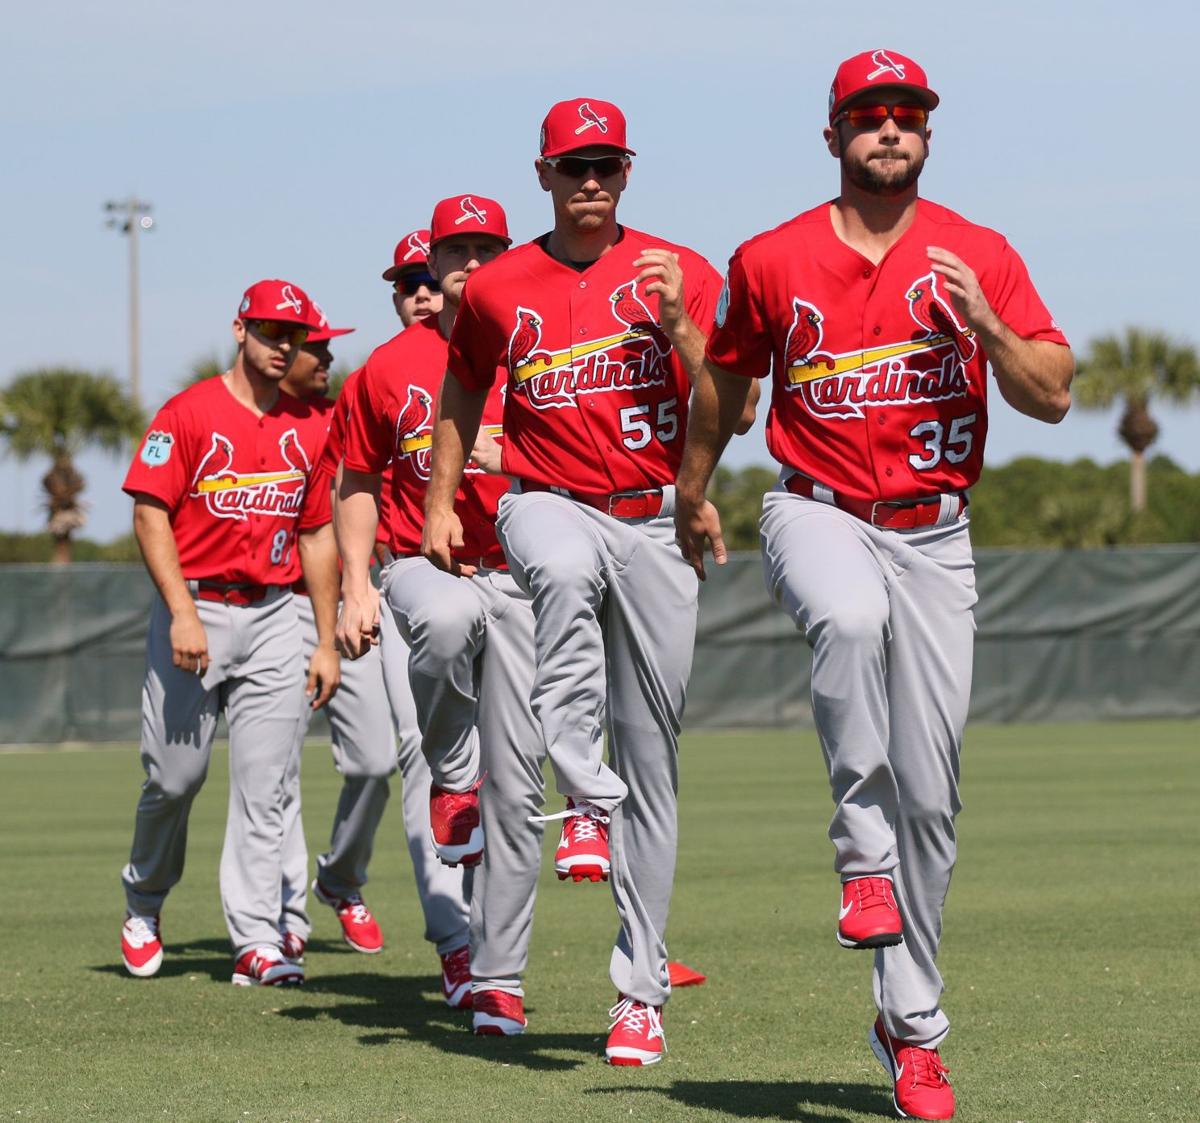 Full Squad Workouts begin at Cardinals Spring Training | St. Louis Cardinals | www.strongerinc.org